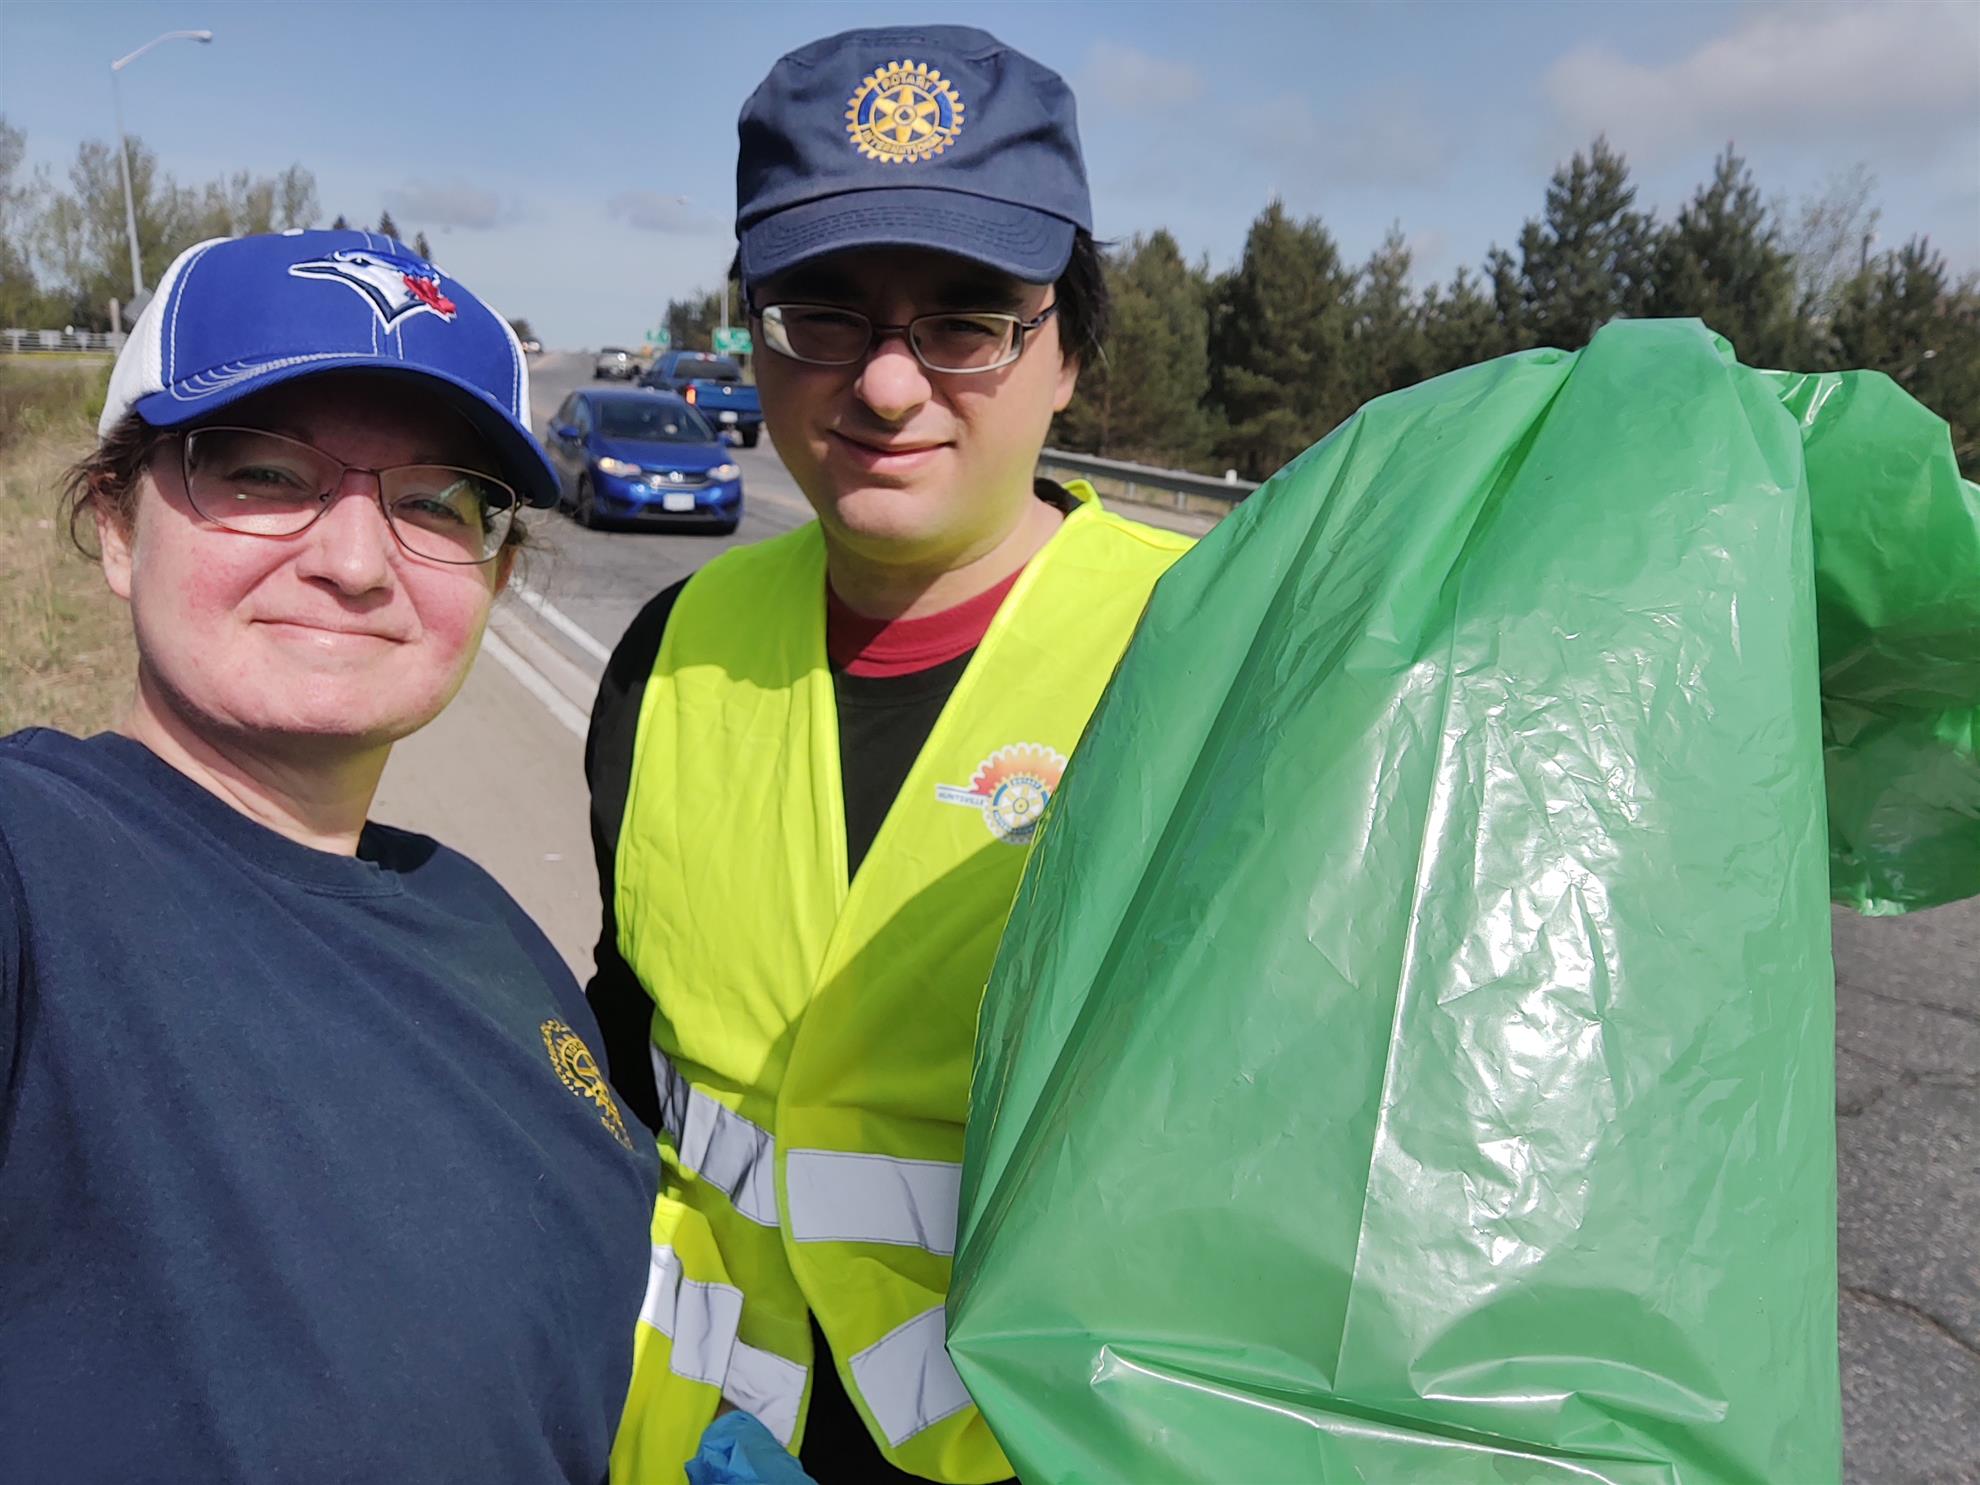 A woman in a dark blue shirt with Rotary logo and man in yellow reflective vest with blue cap with Rotary logo stand by a roadway with a green trash bag.